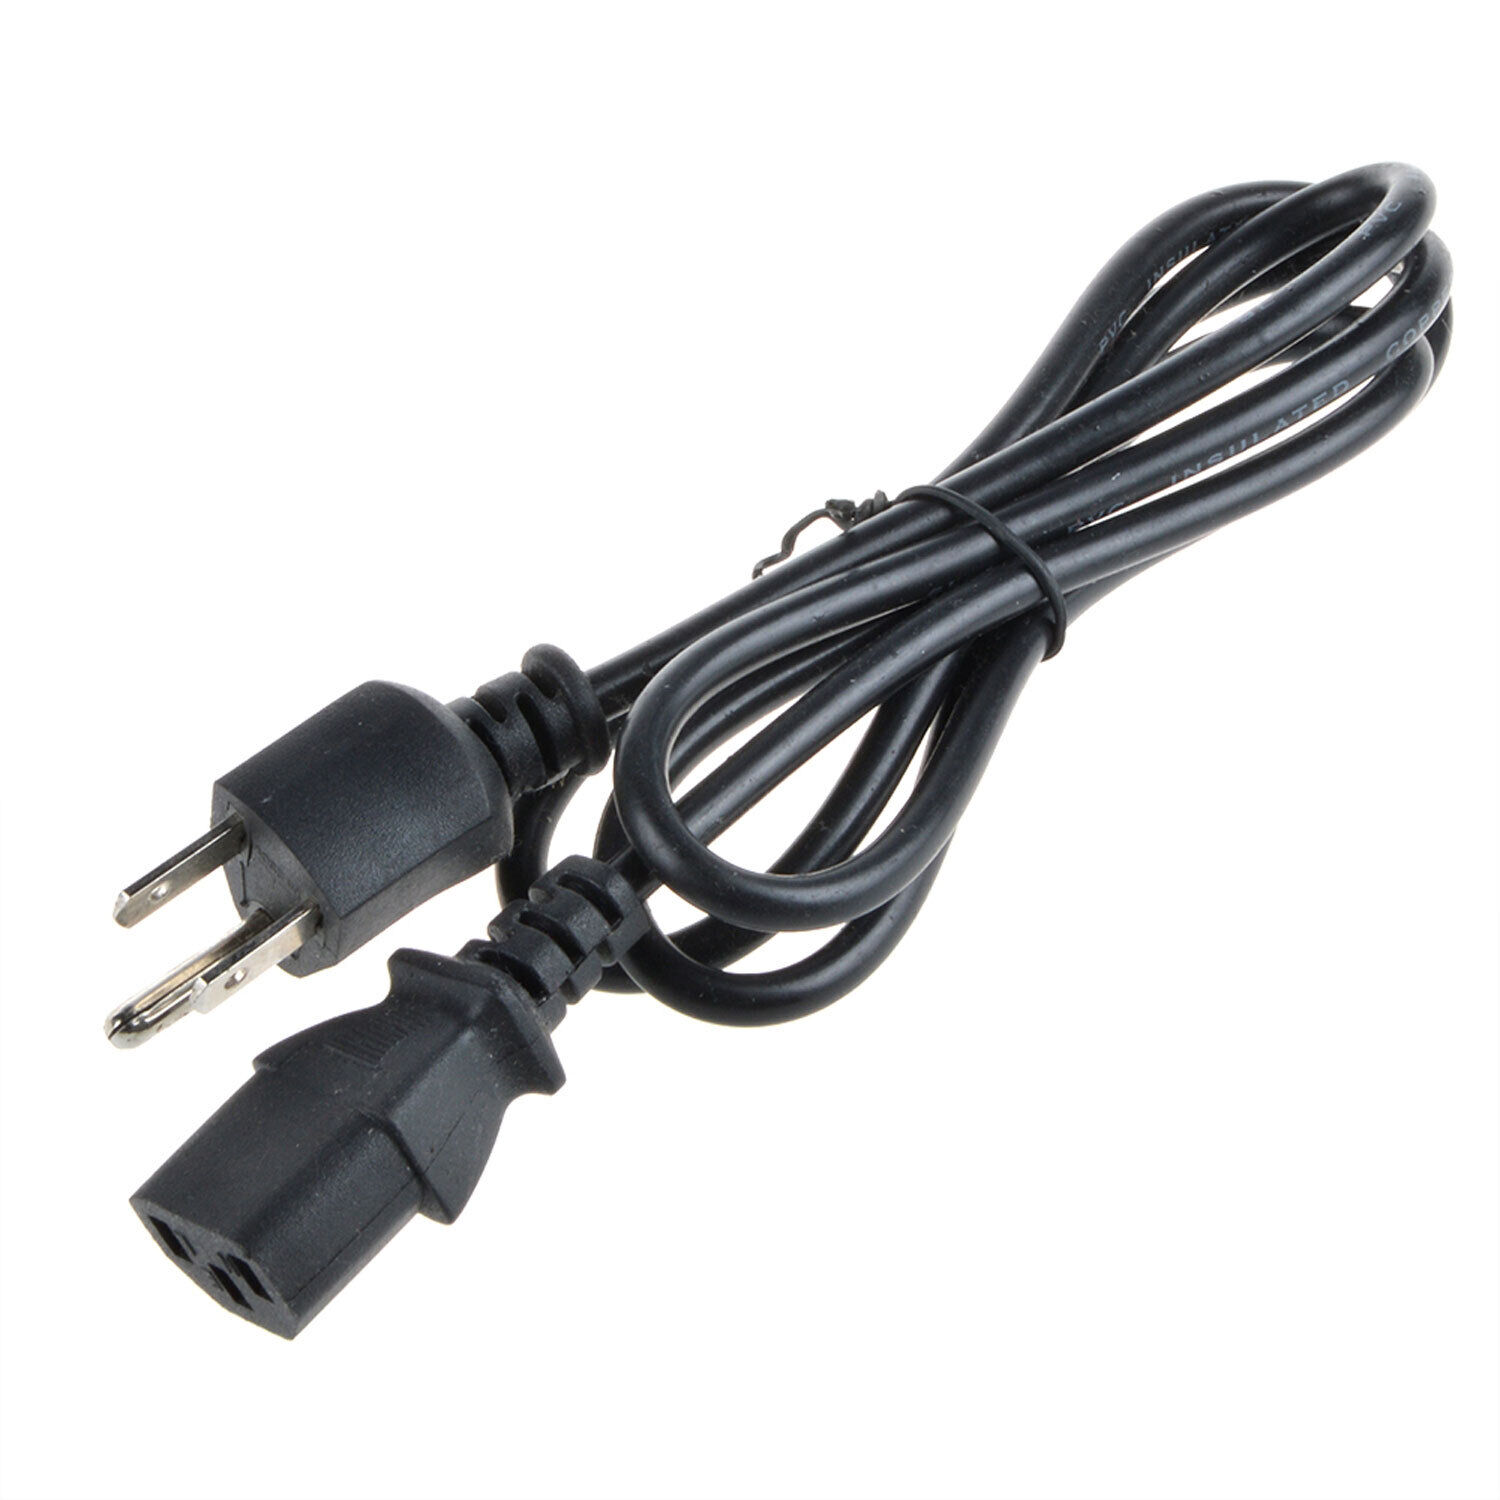 PwrON 5FT AC Power Cord Cable for Dell Alienware Area-51 Game Desktop Computer